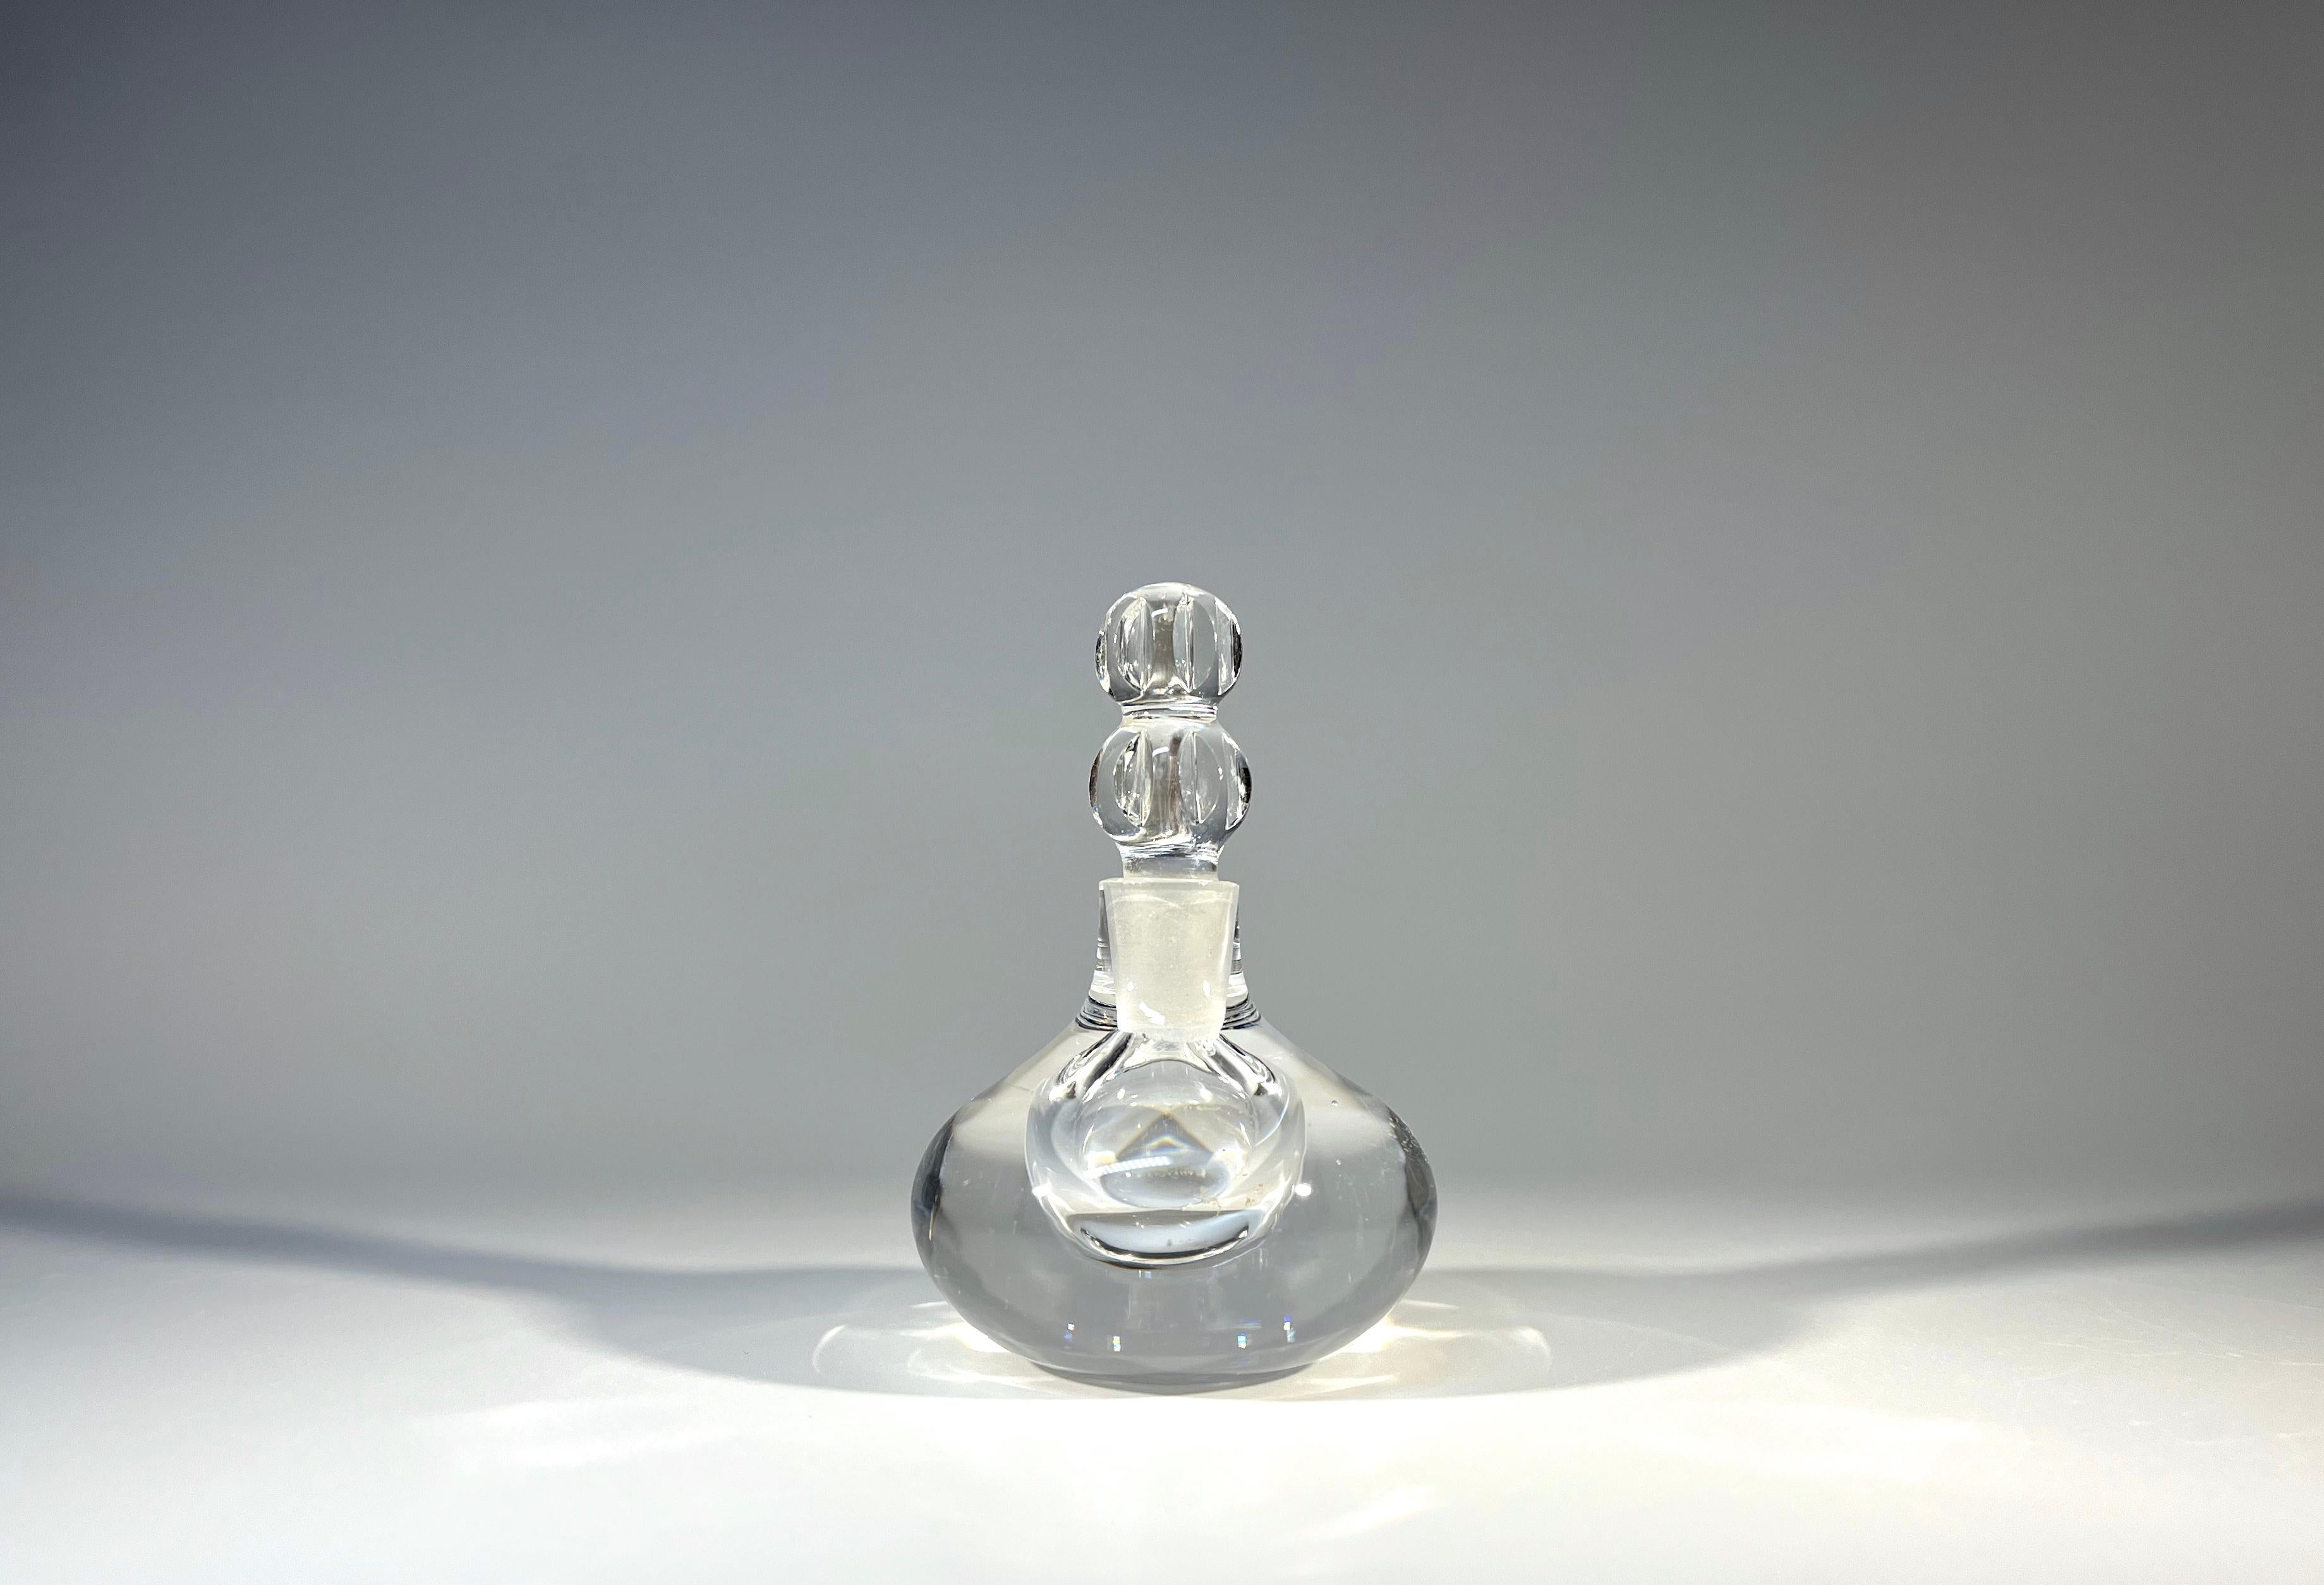 Scandinavian Modern Fine Crystal Perfume Bottle With Faceted Stopper By Orrefors, Sweden. c1980's For Sale